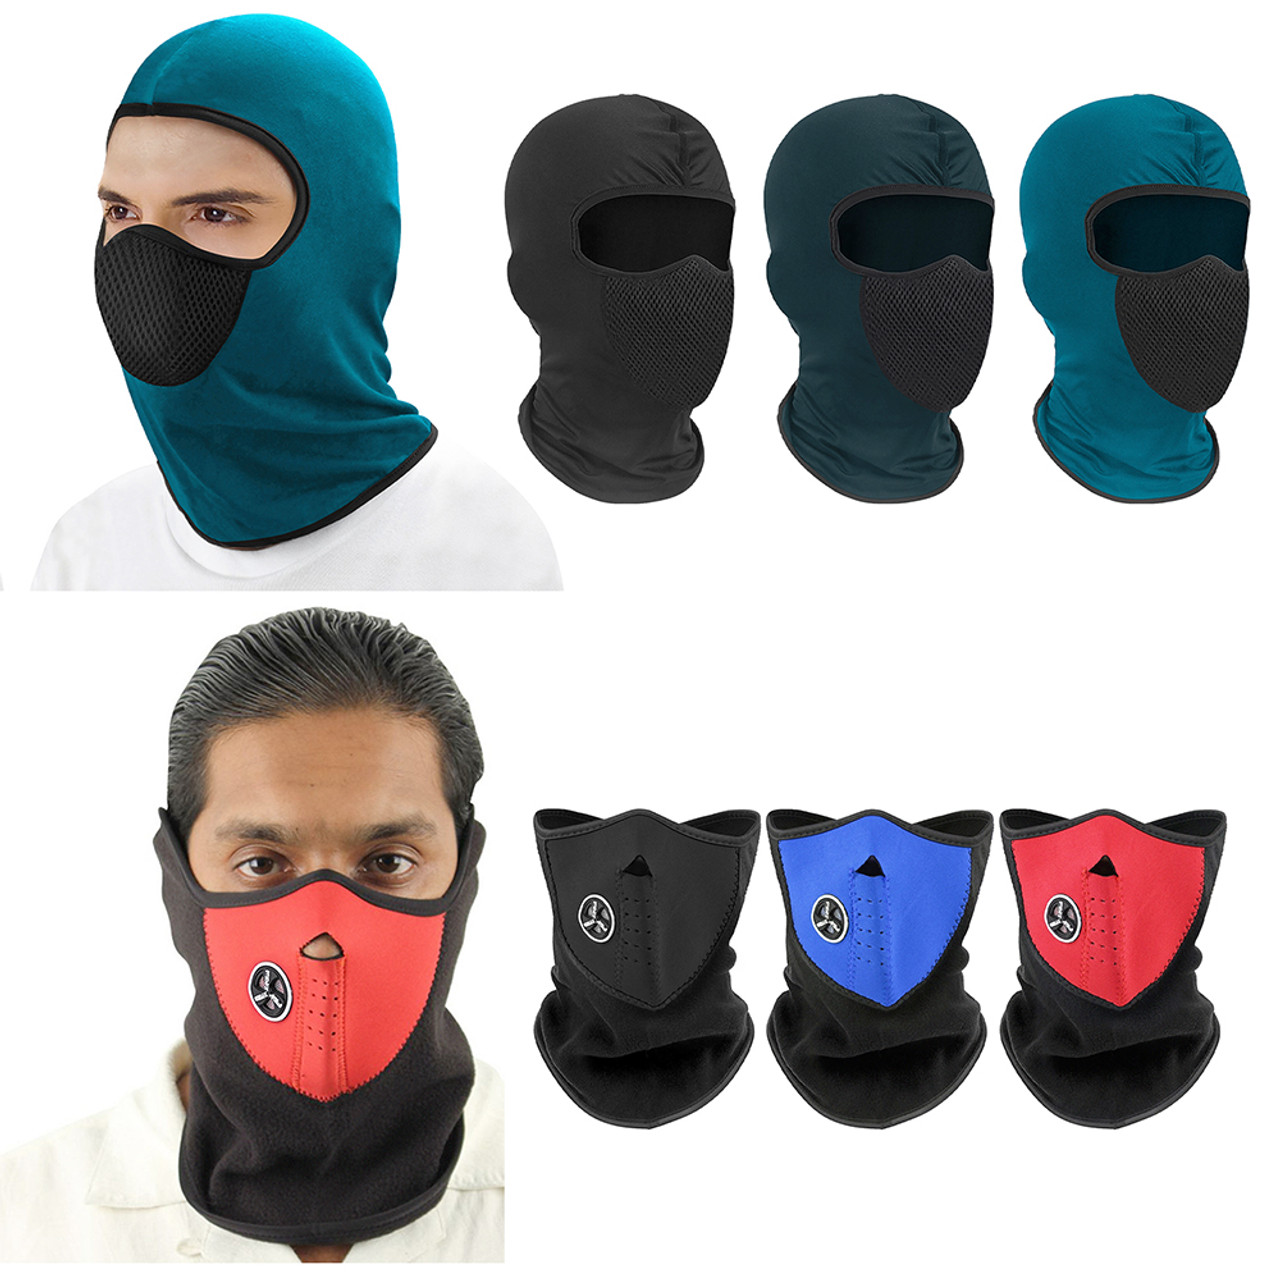 Men's Warm Windproof Breathable Thermal Balaclava Winter Ski Face (2-Pack) - UntilGone.com